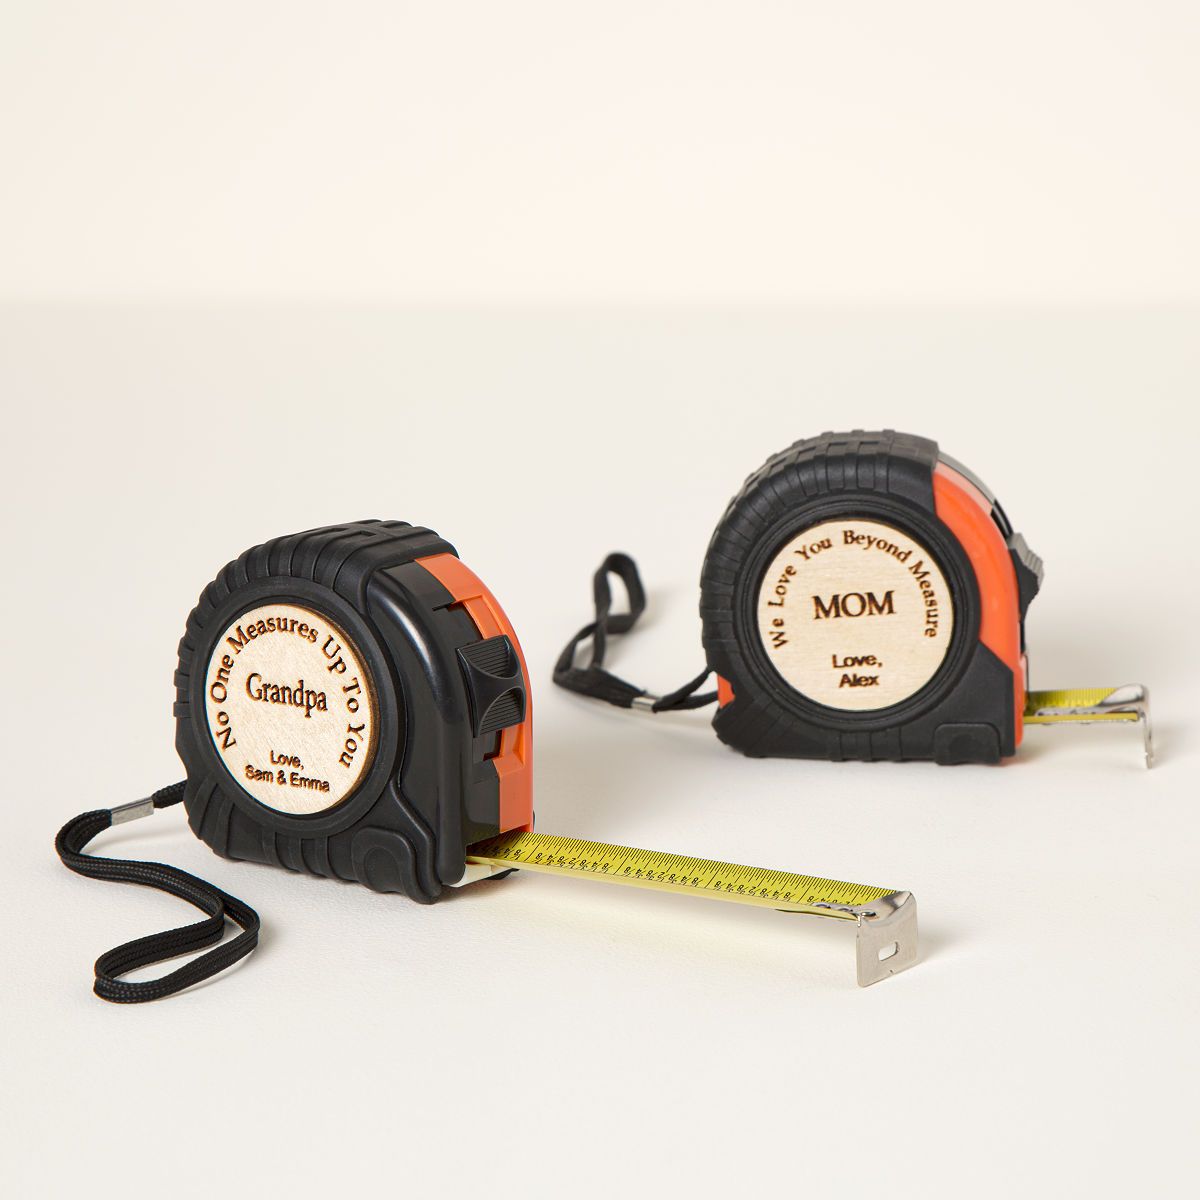 Personalized Engraved Tape Measure | UncommonGoods